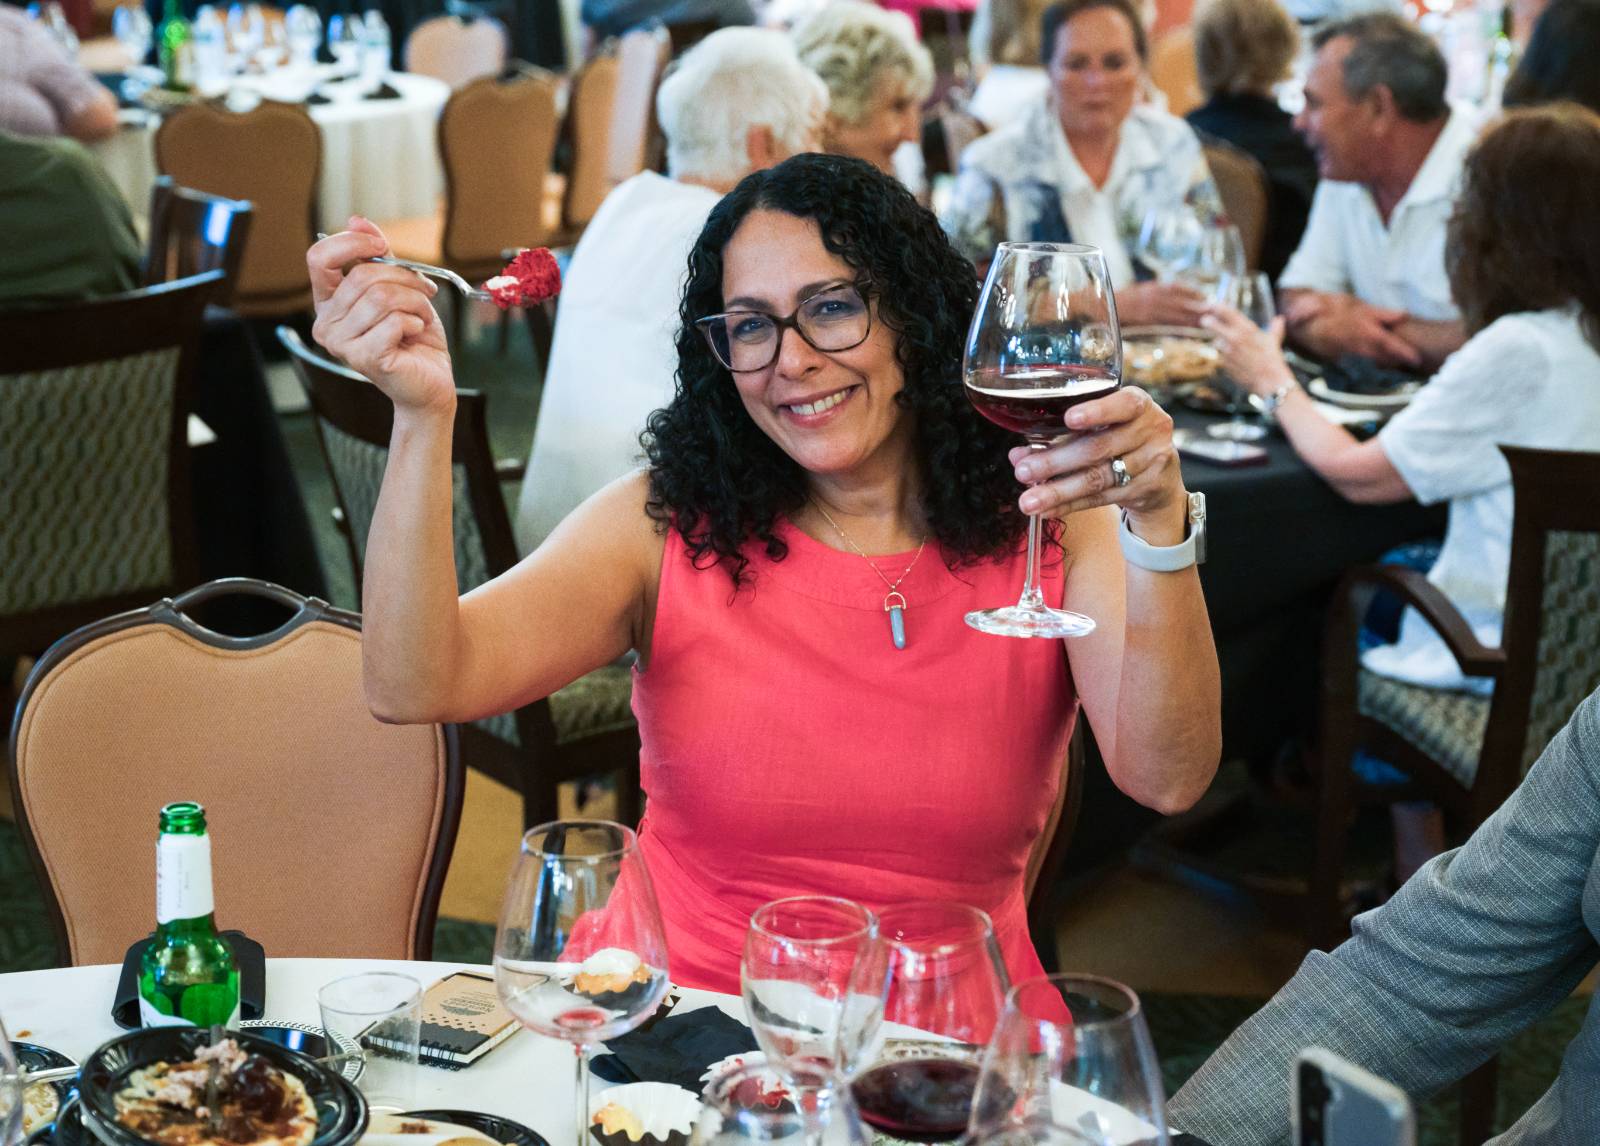 A woman enjoying some wine and food and an event.